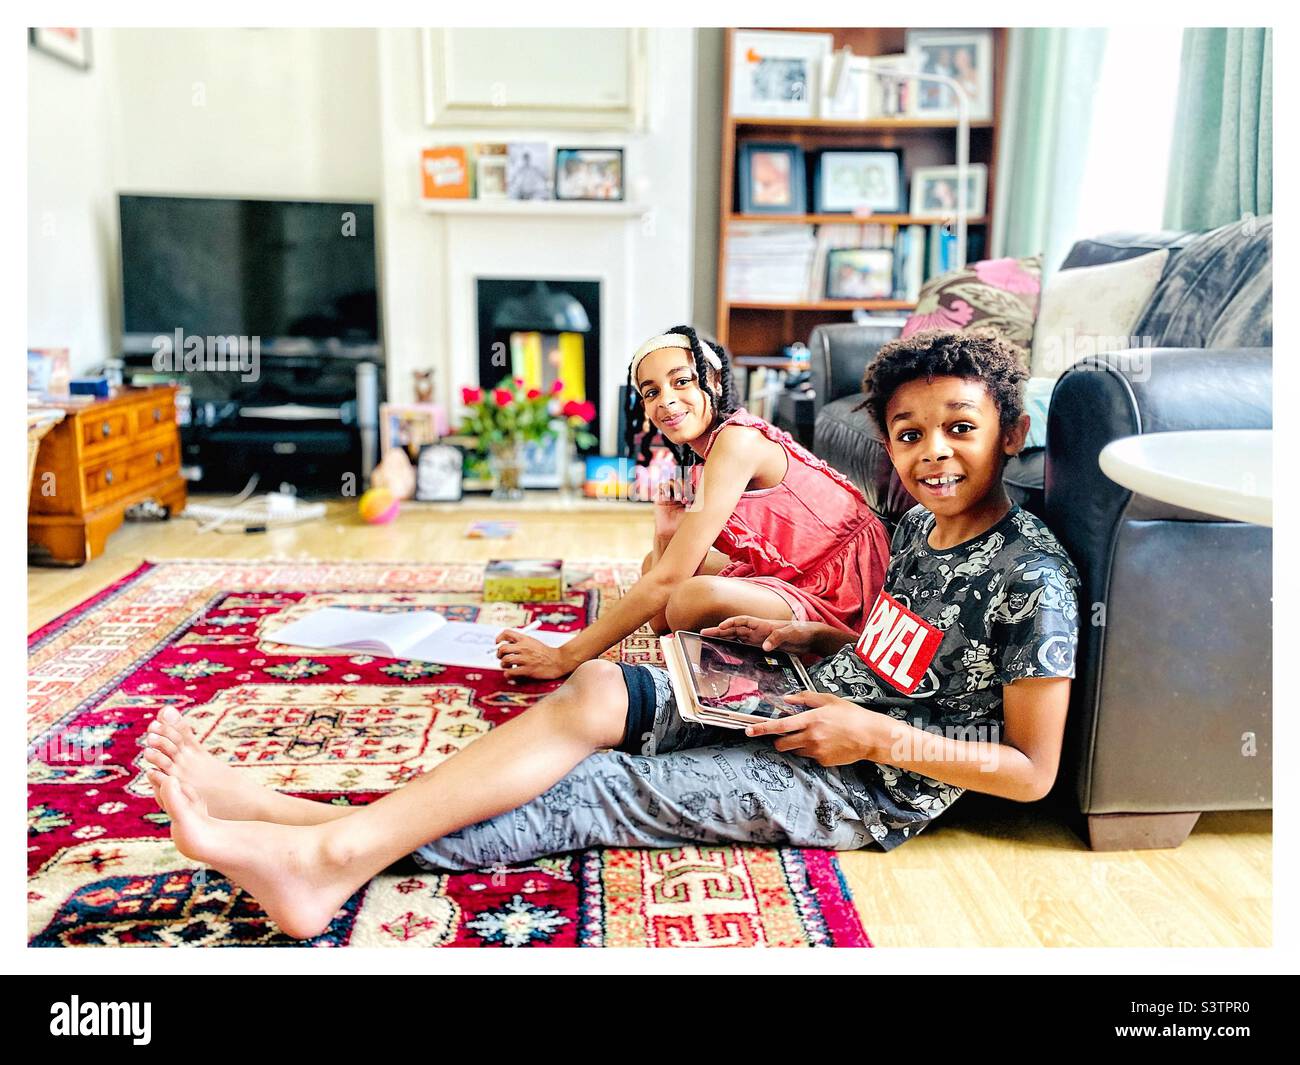 Multicultural siblings relaxing at home. Stock Photo